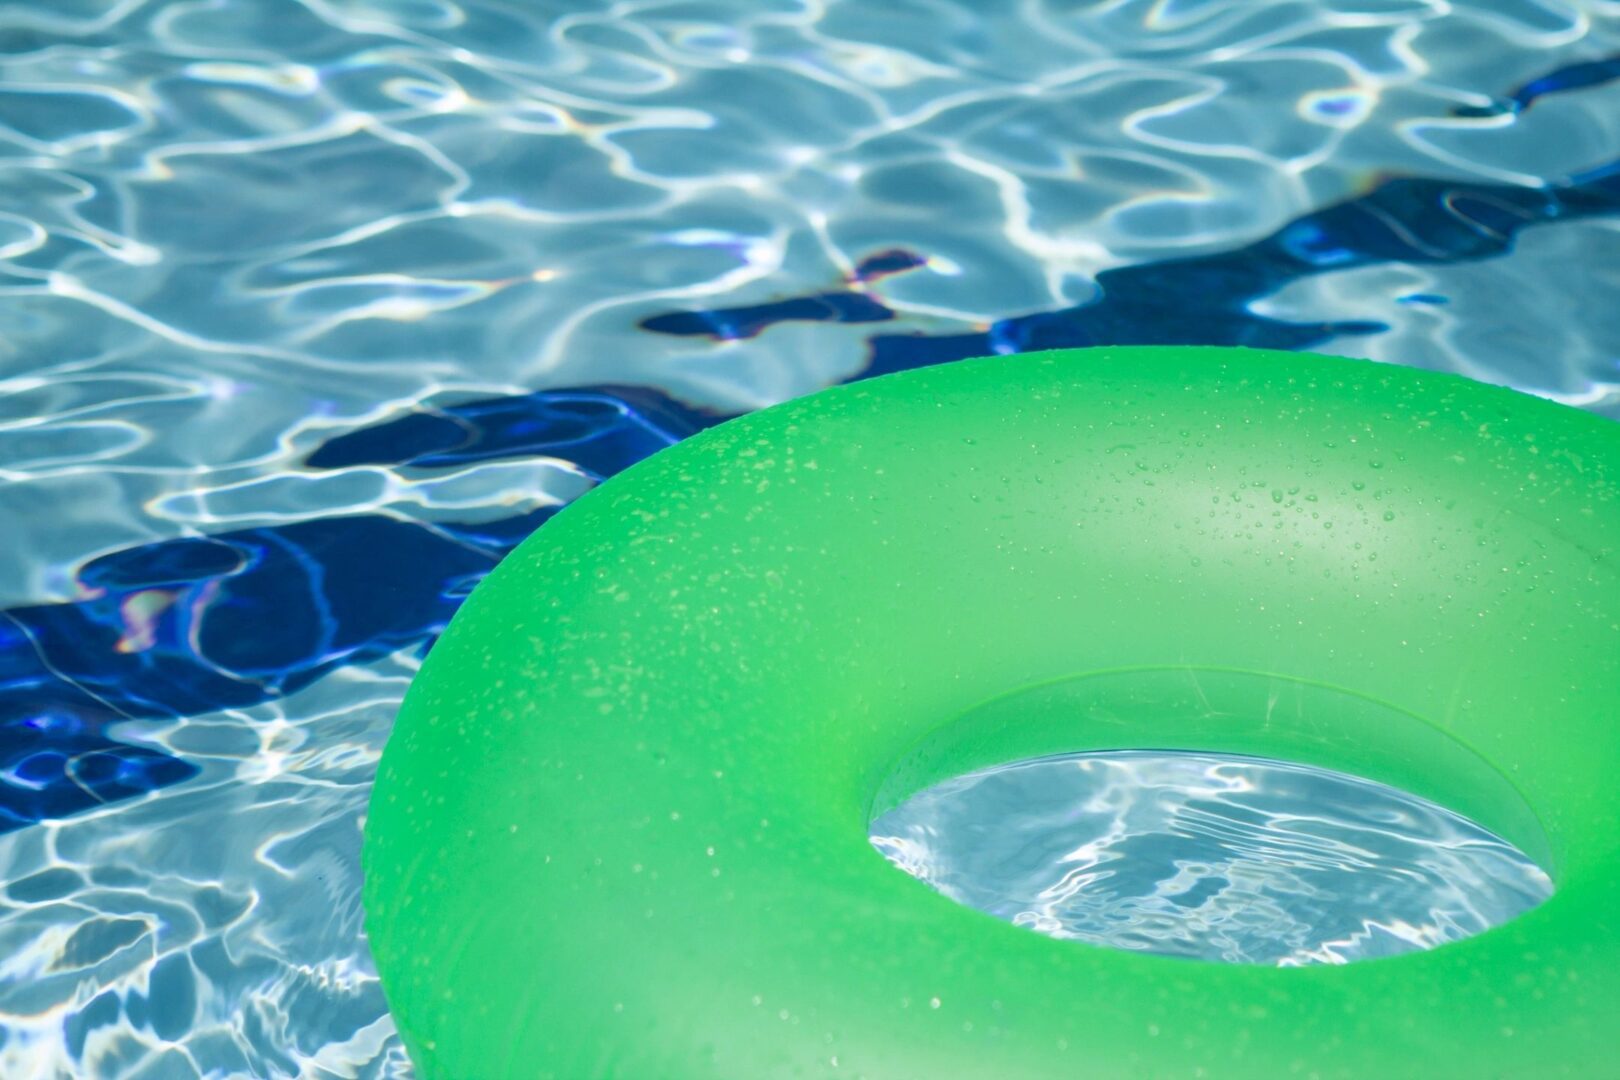 A green inflatable ring floating in a pool.